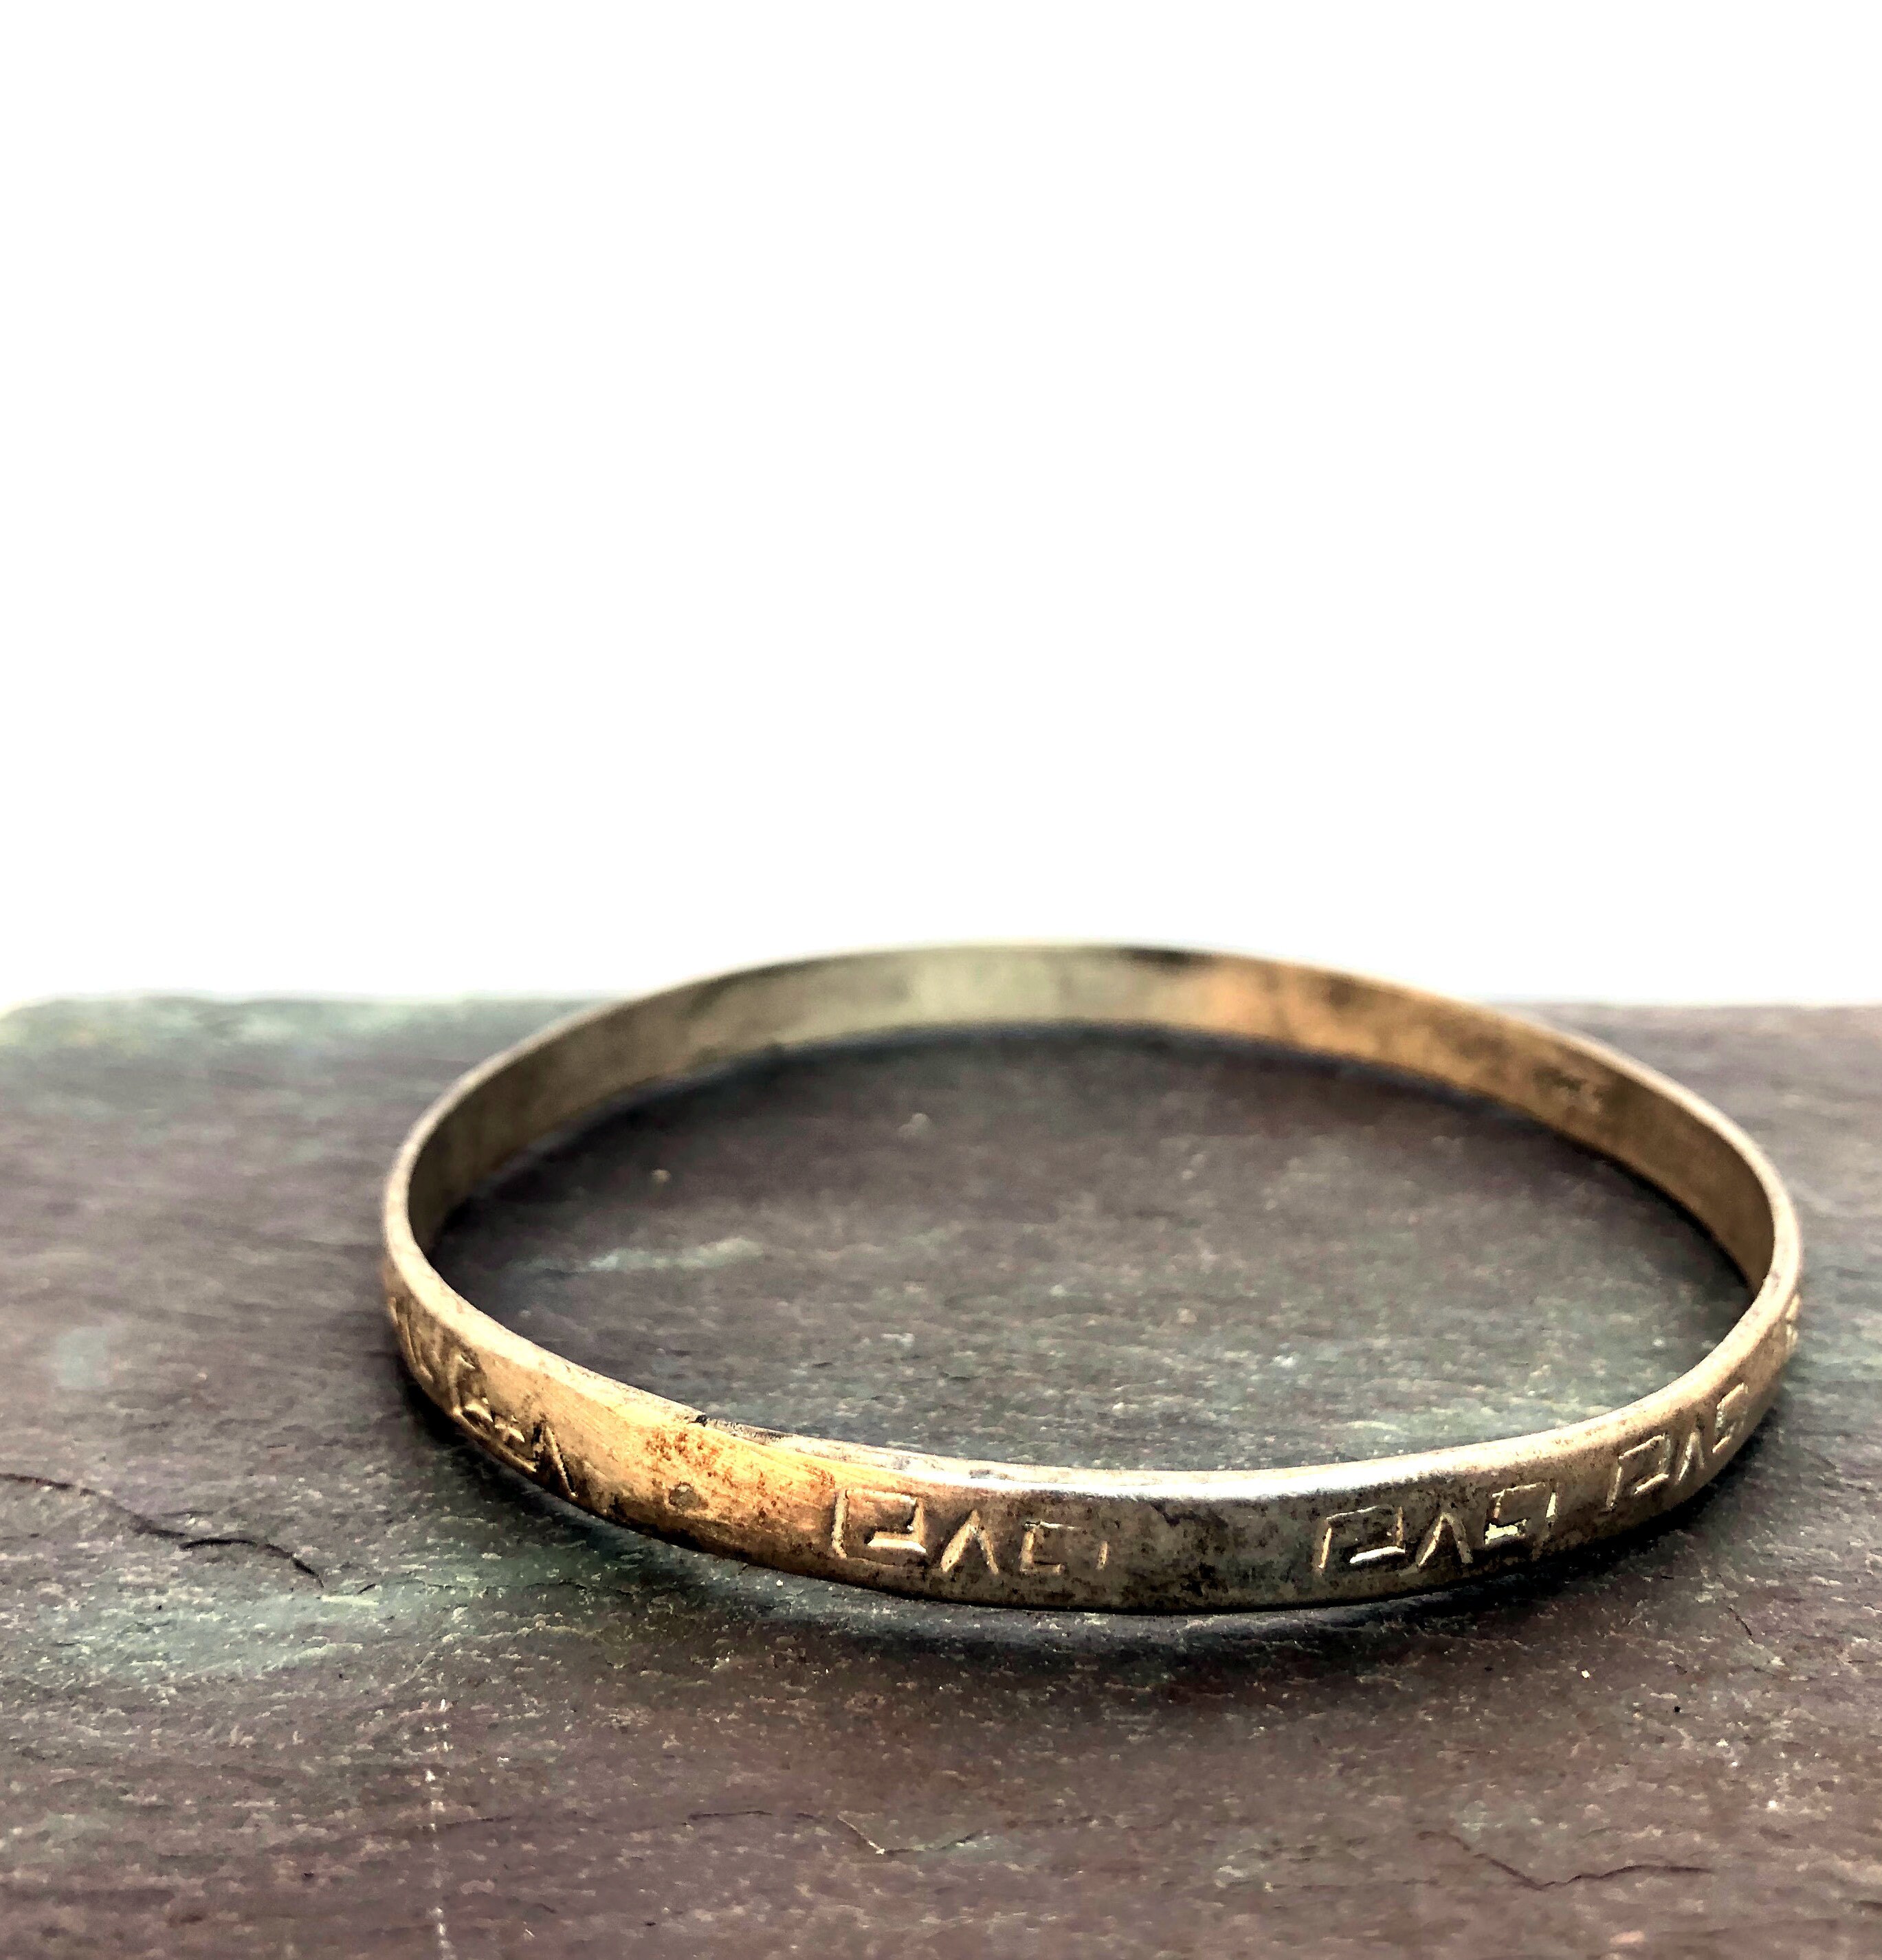 Vintage Bangle Bracelet Alpaca Silver Etched Ram Horn Design Abstracted Mexican Alloy Metal Jewelry Inca Look Pattern Thin Alpacca